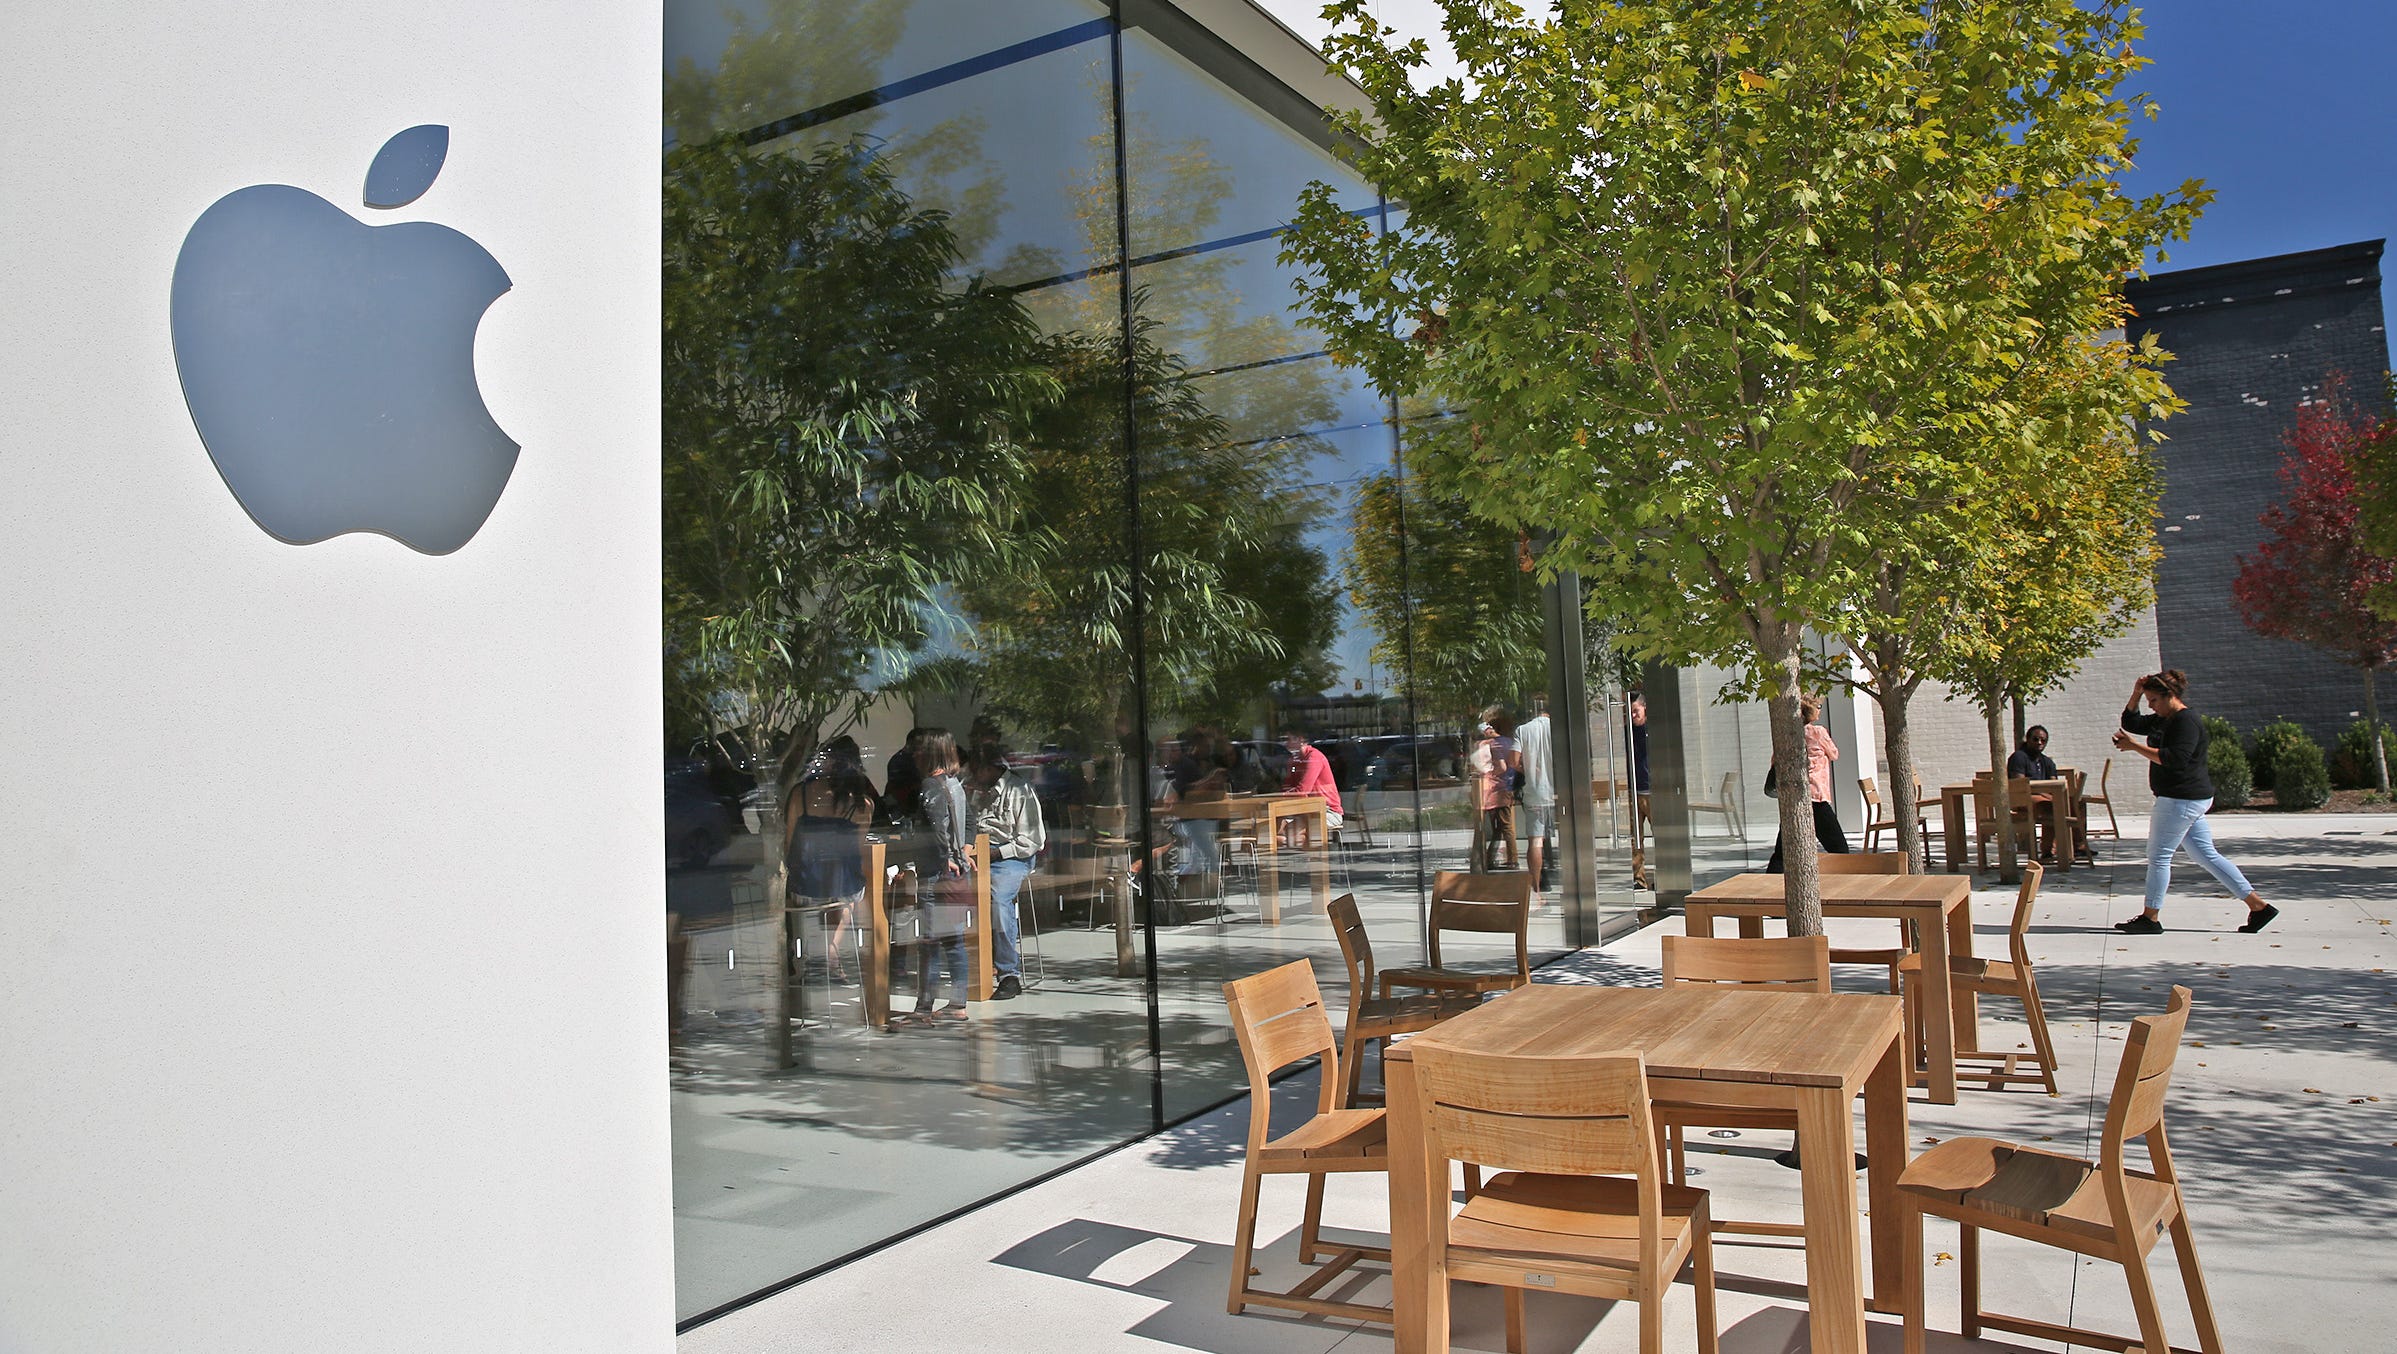 Apple unveils new store design in Indy